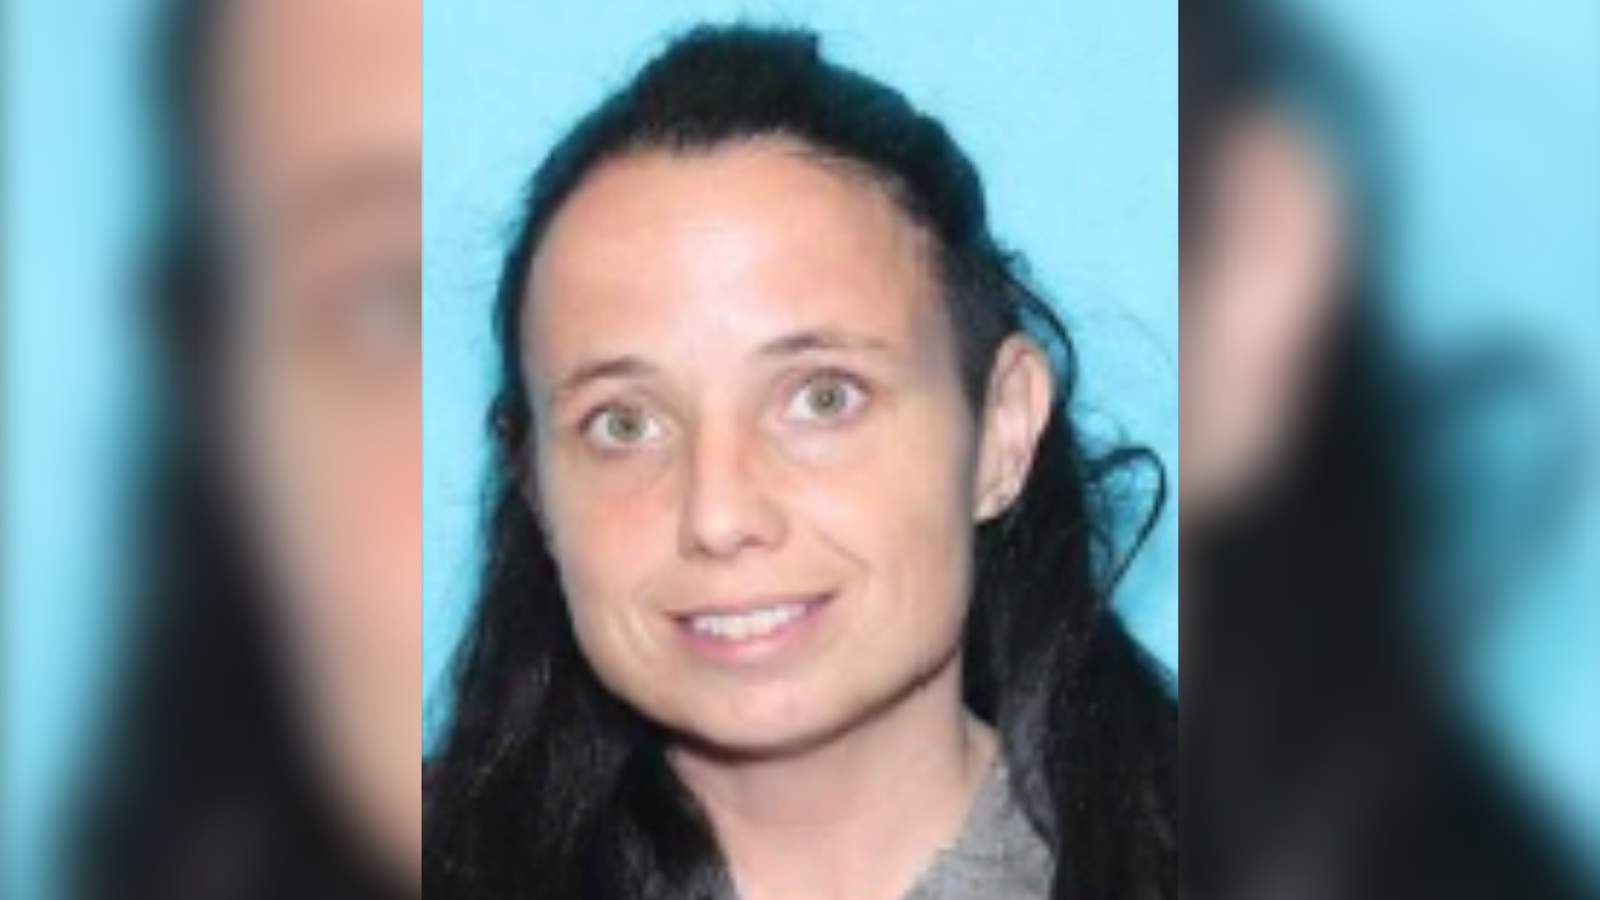 Harris County deputies searching for 42-year-old woman reported missing